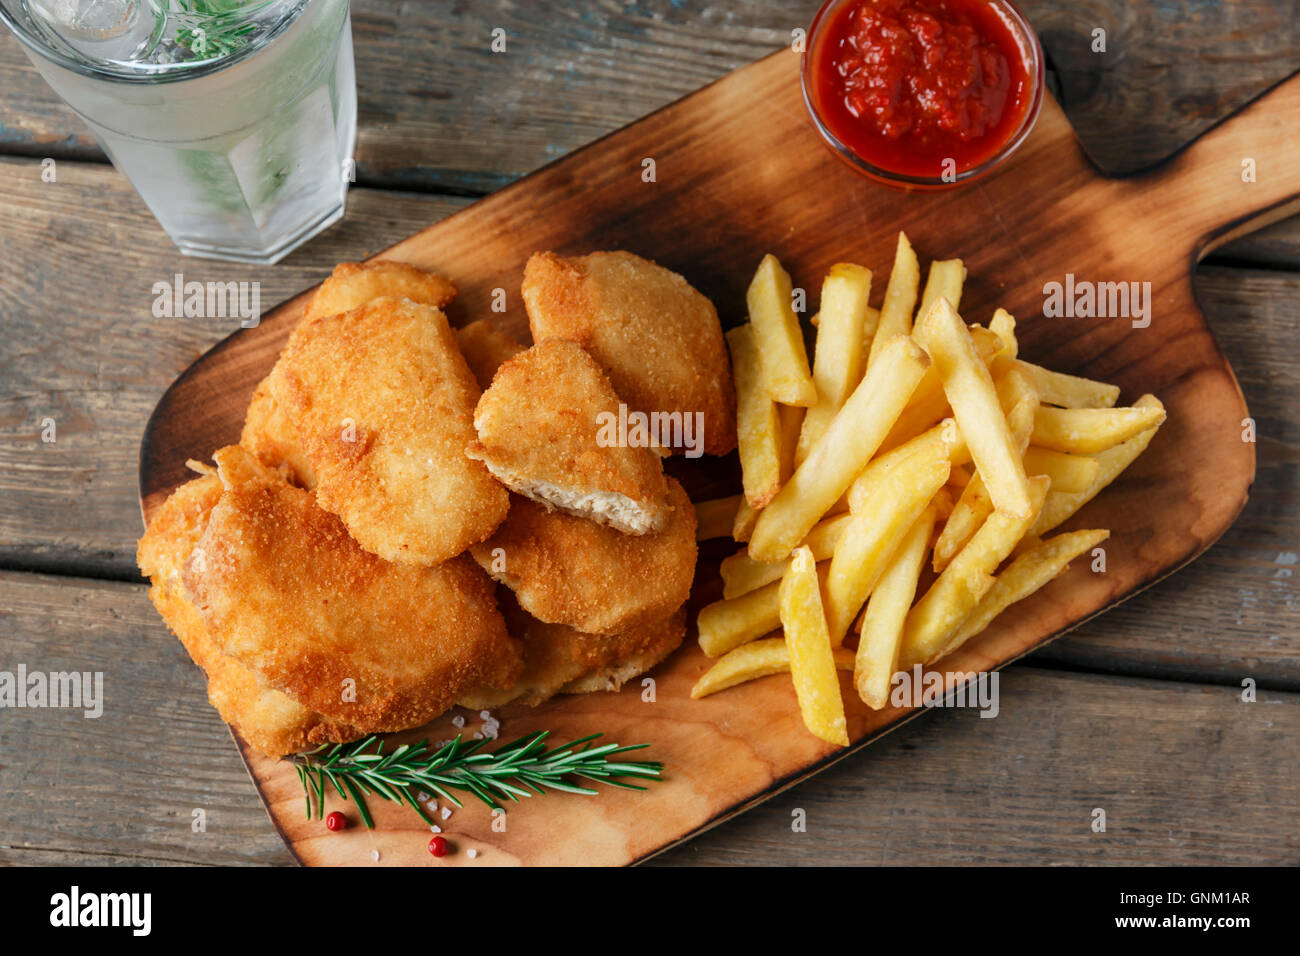 chicken nuggets french fries on the board with red sauce Stock Photo